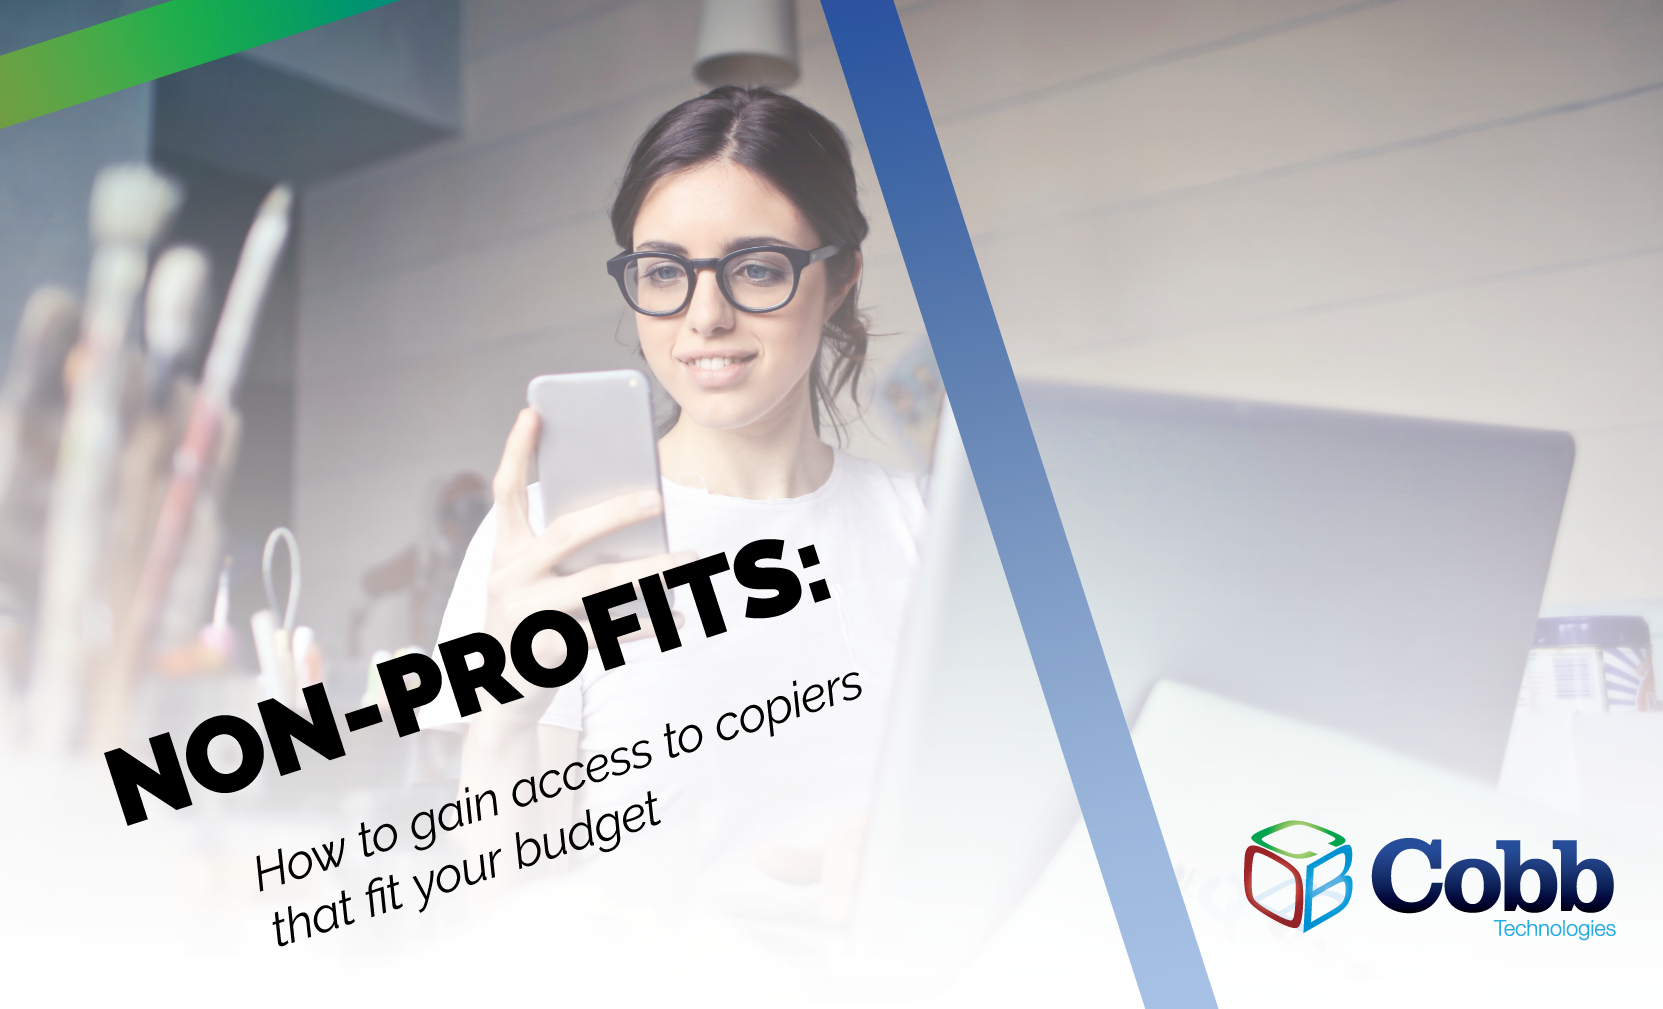 How Non-Profits Can Gain Access to Copiers That Fit Your Budget